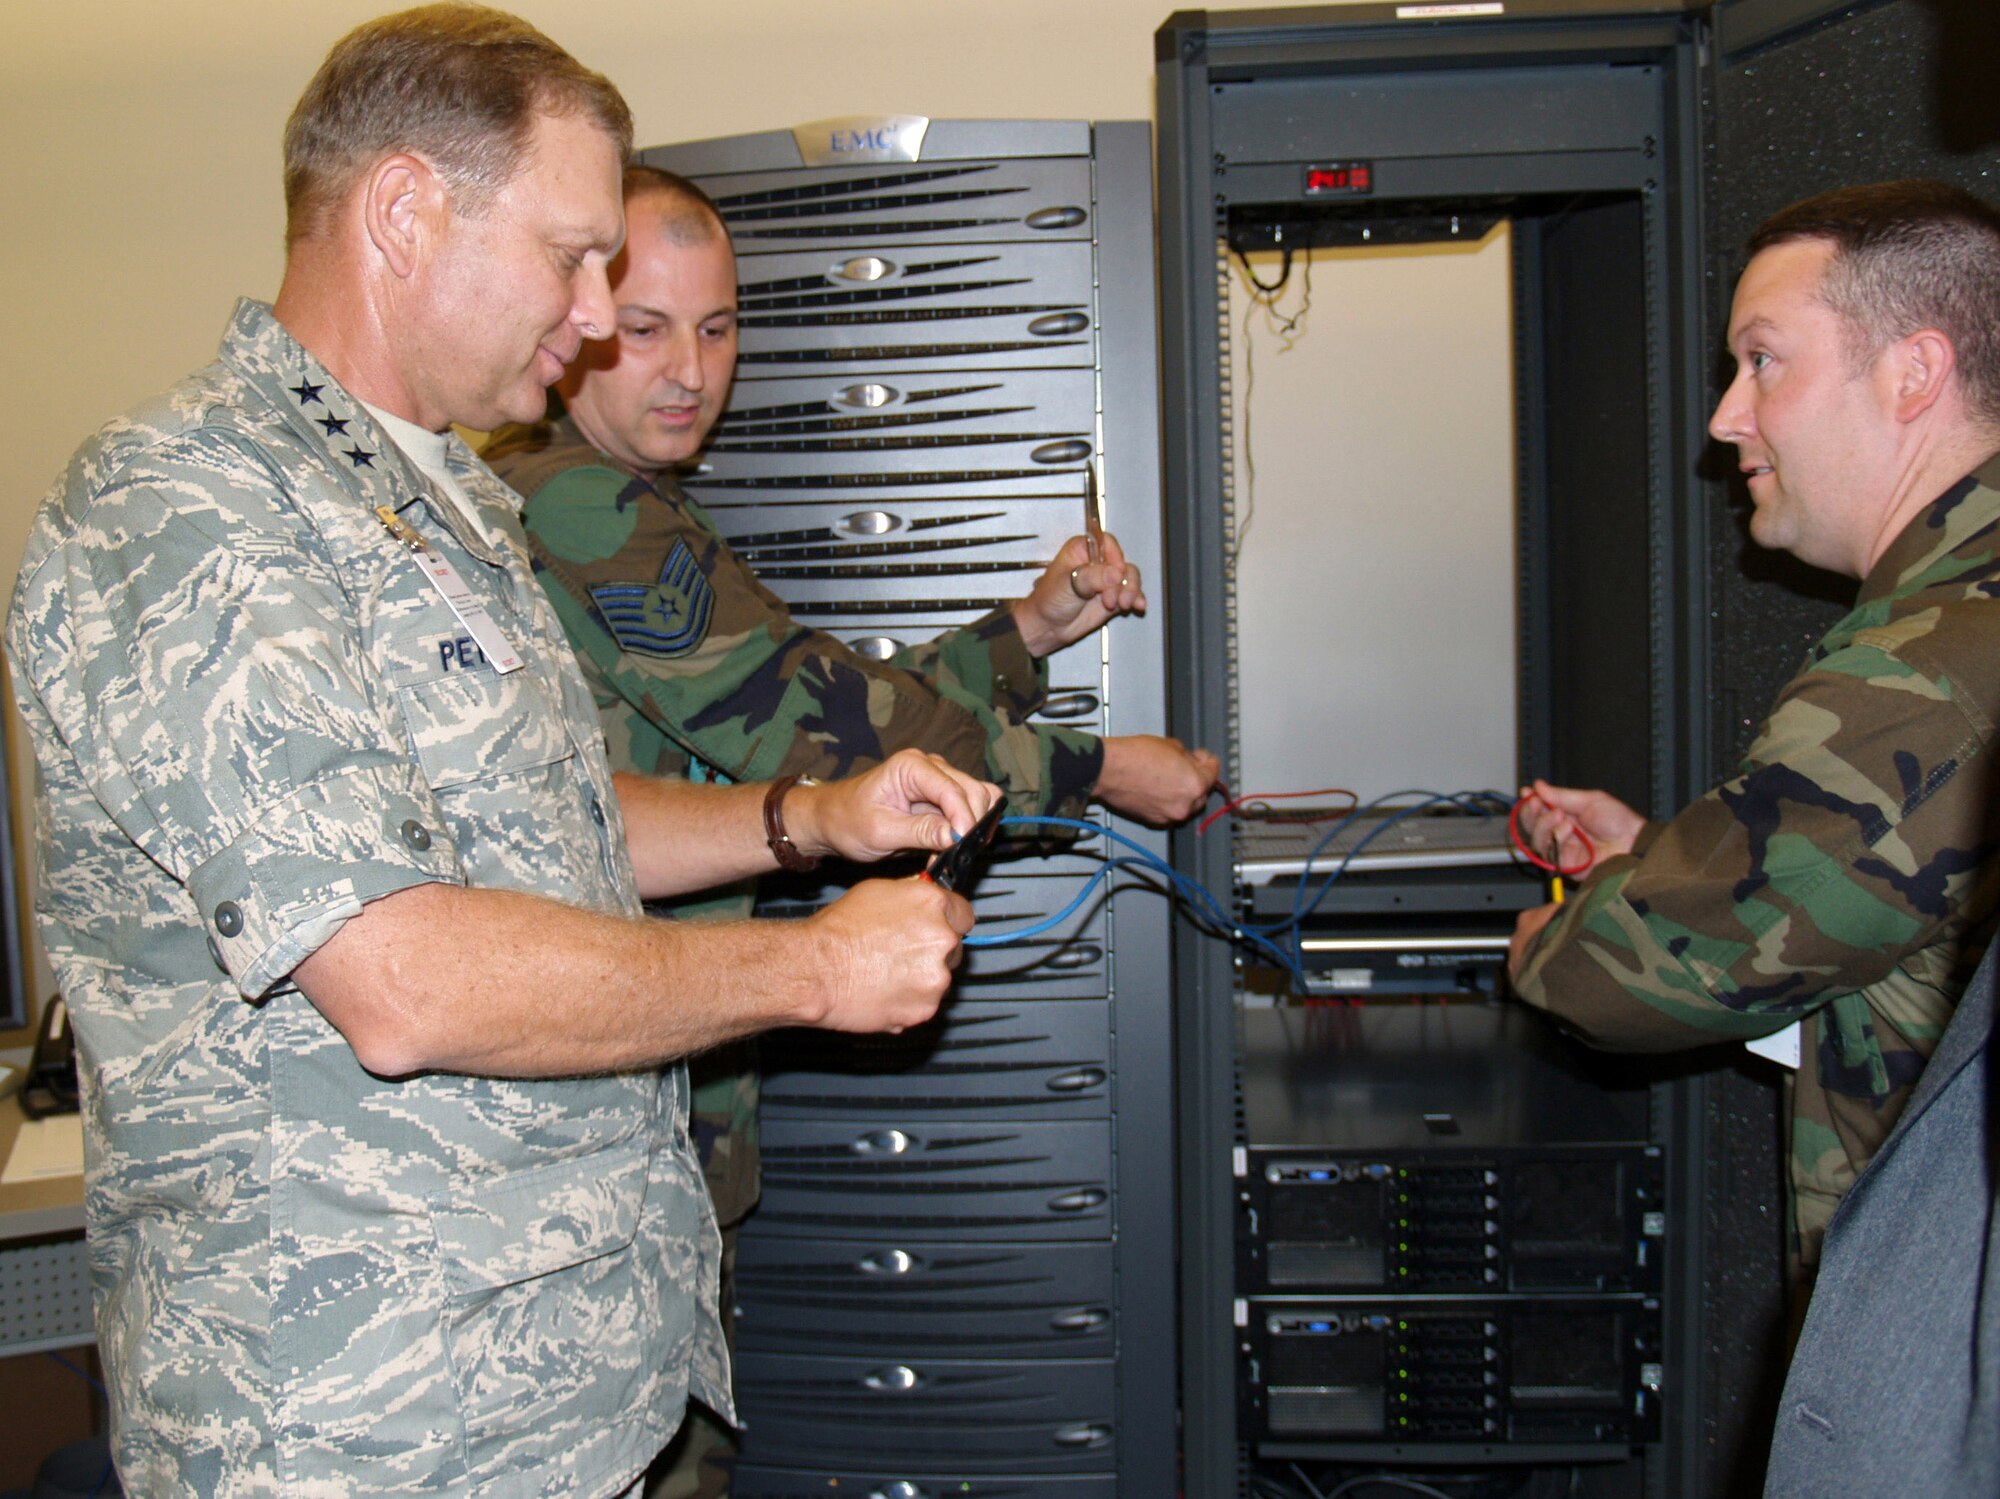 As part of a demonstration at the Global Cyberspace Integration Center, Lt. Gen. Michael W. Peterson, Tech. Sgt. Rob Eubank and Maj. Lanny Greenbaum clip wires to create a "network outage" to showcase server virtualization survivability.  General Peterson is Air Force chief of warfighting integration and chief information officer.  Major Greenbaum and Sergeant Eubank are with the GCIC modernization and innovation division.  (U.S. Air Force photo/Amelia Donnell)